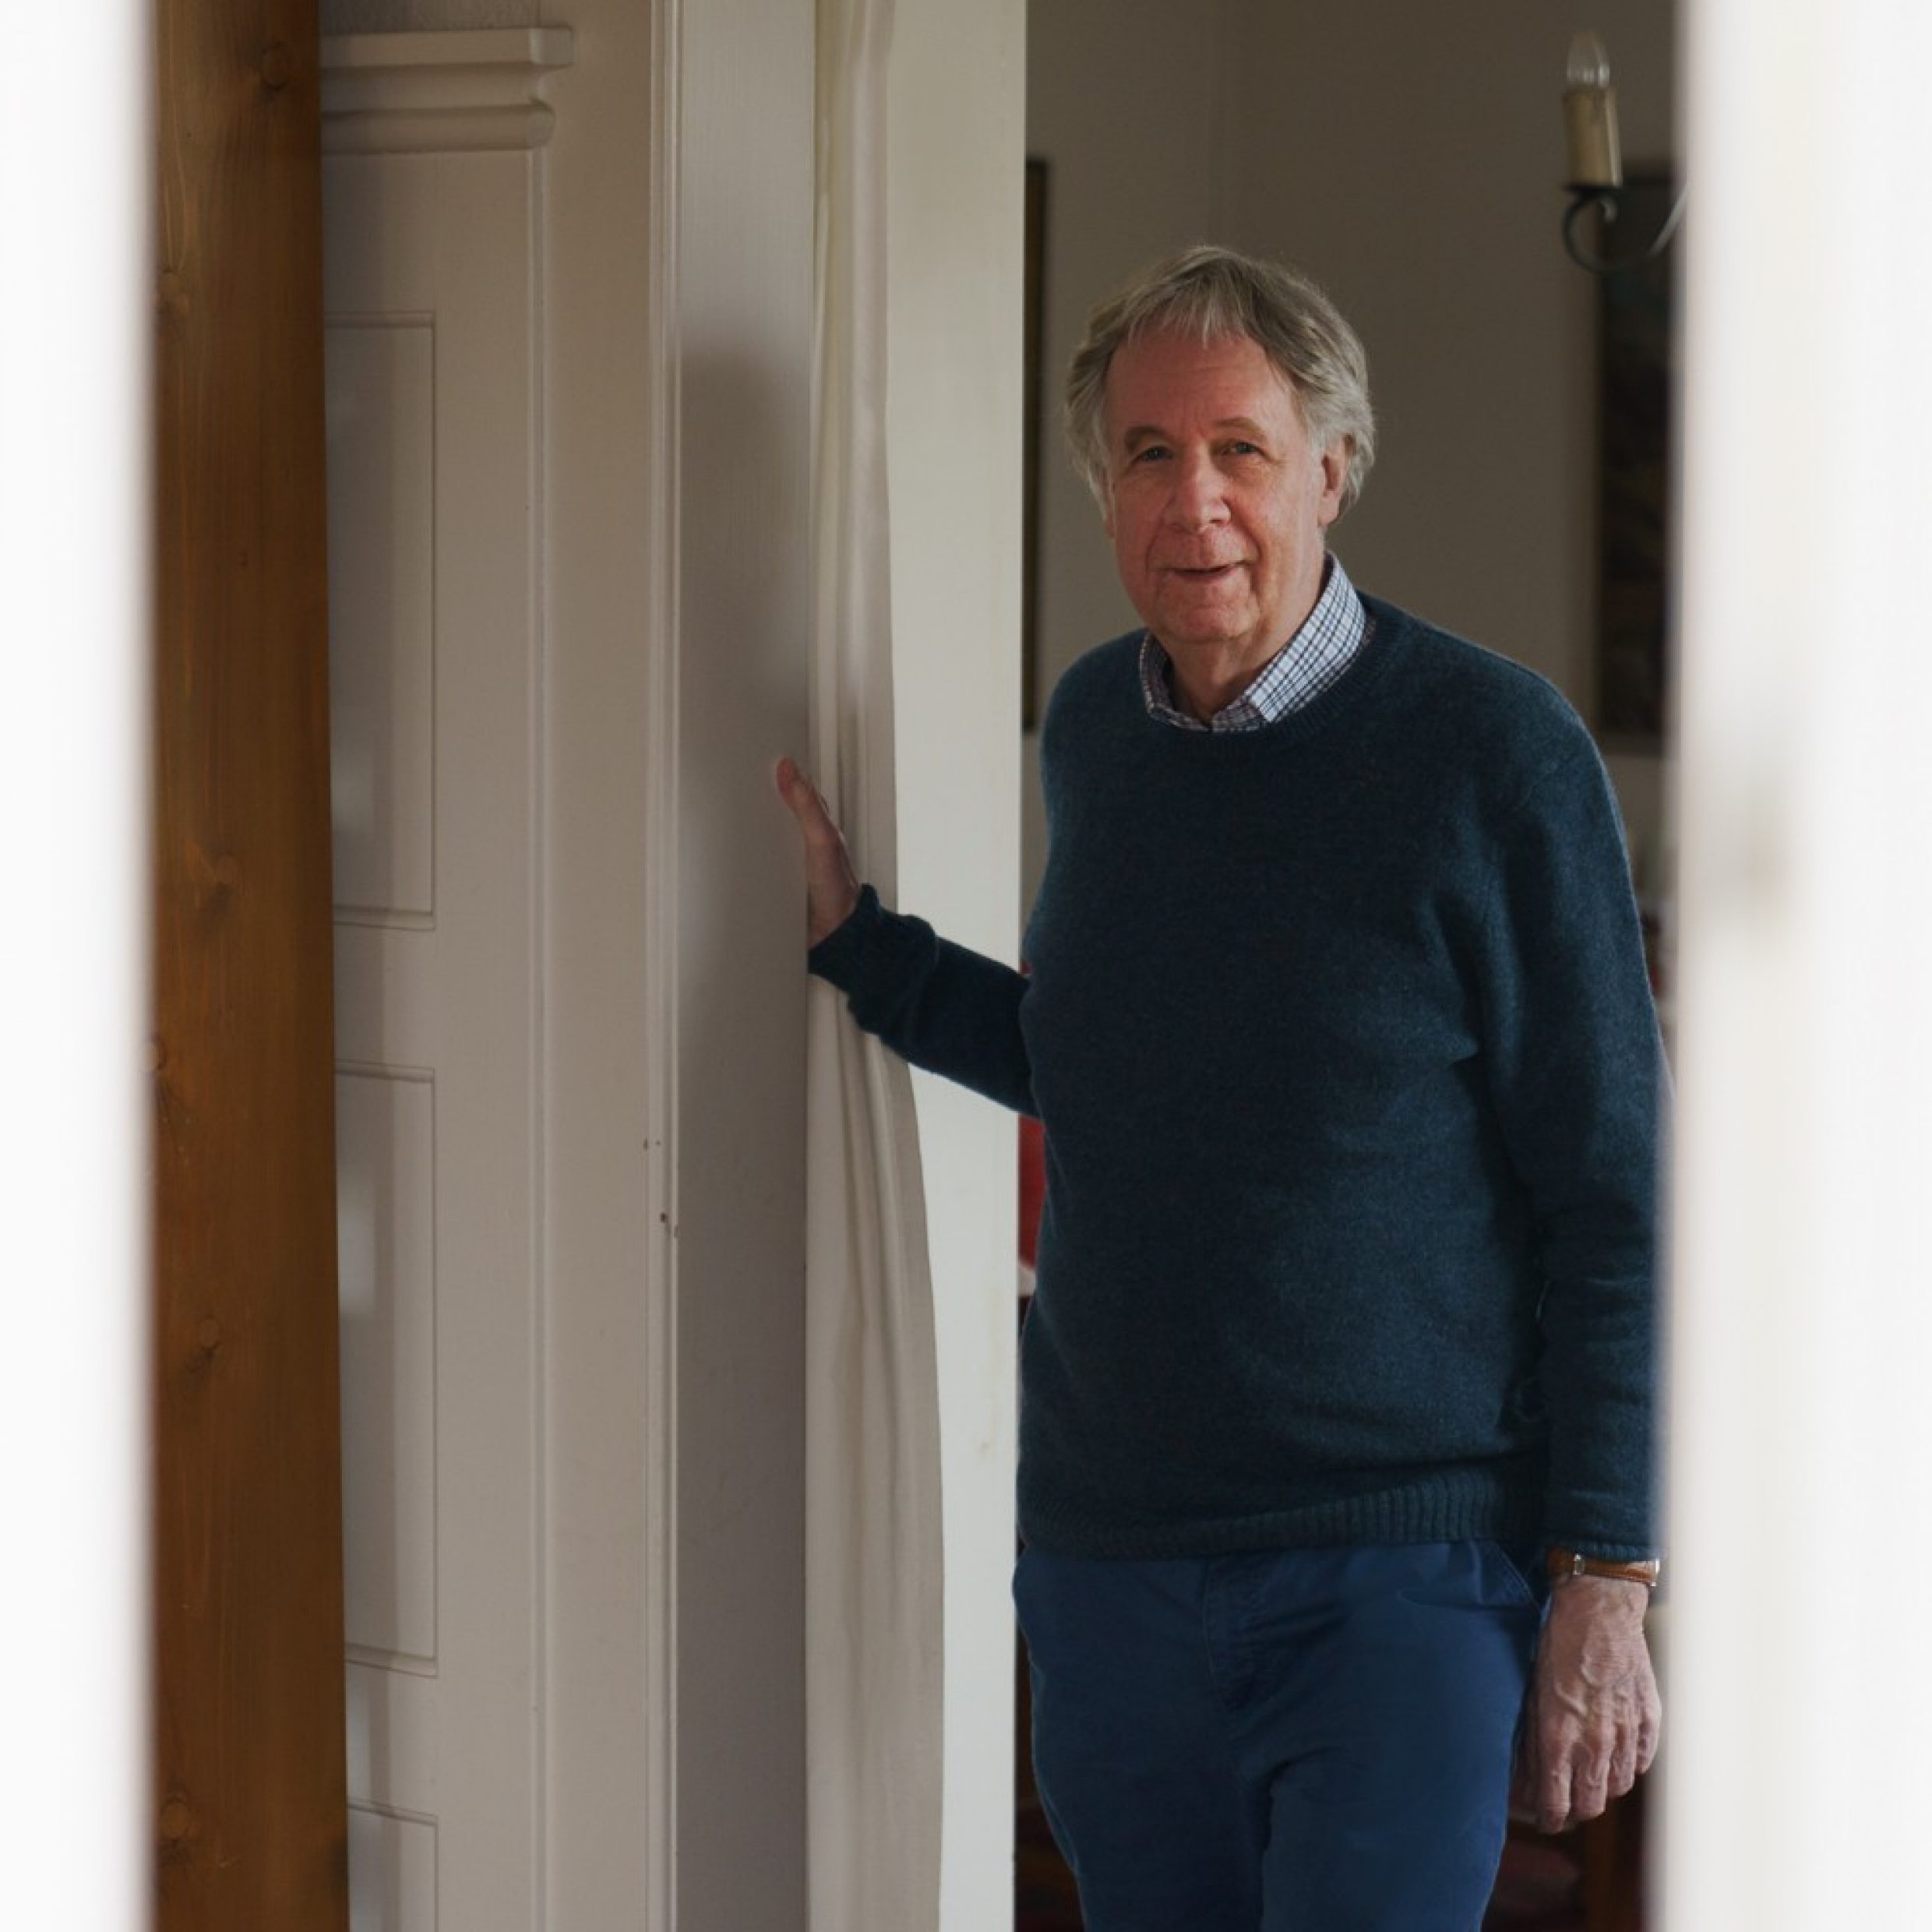 An older man stands by a door frame and looks into the camera. He’s wearing a shirt with a blue sweater over it.